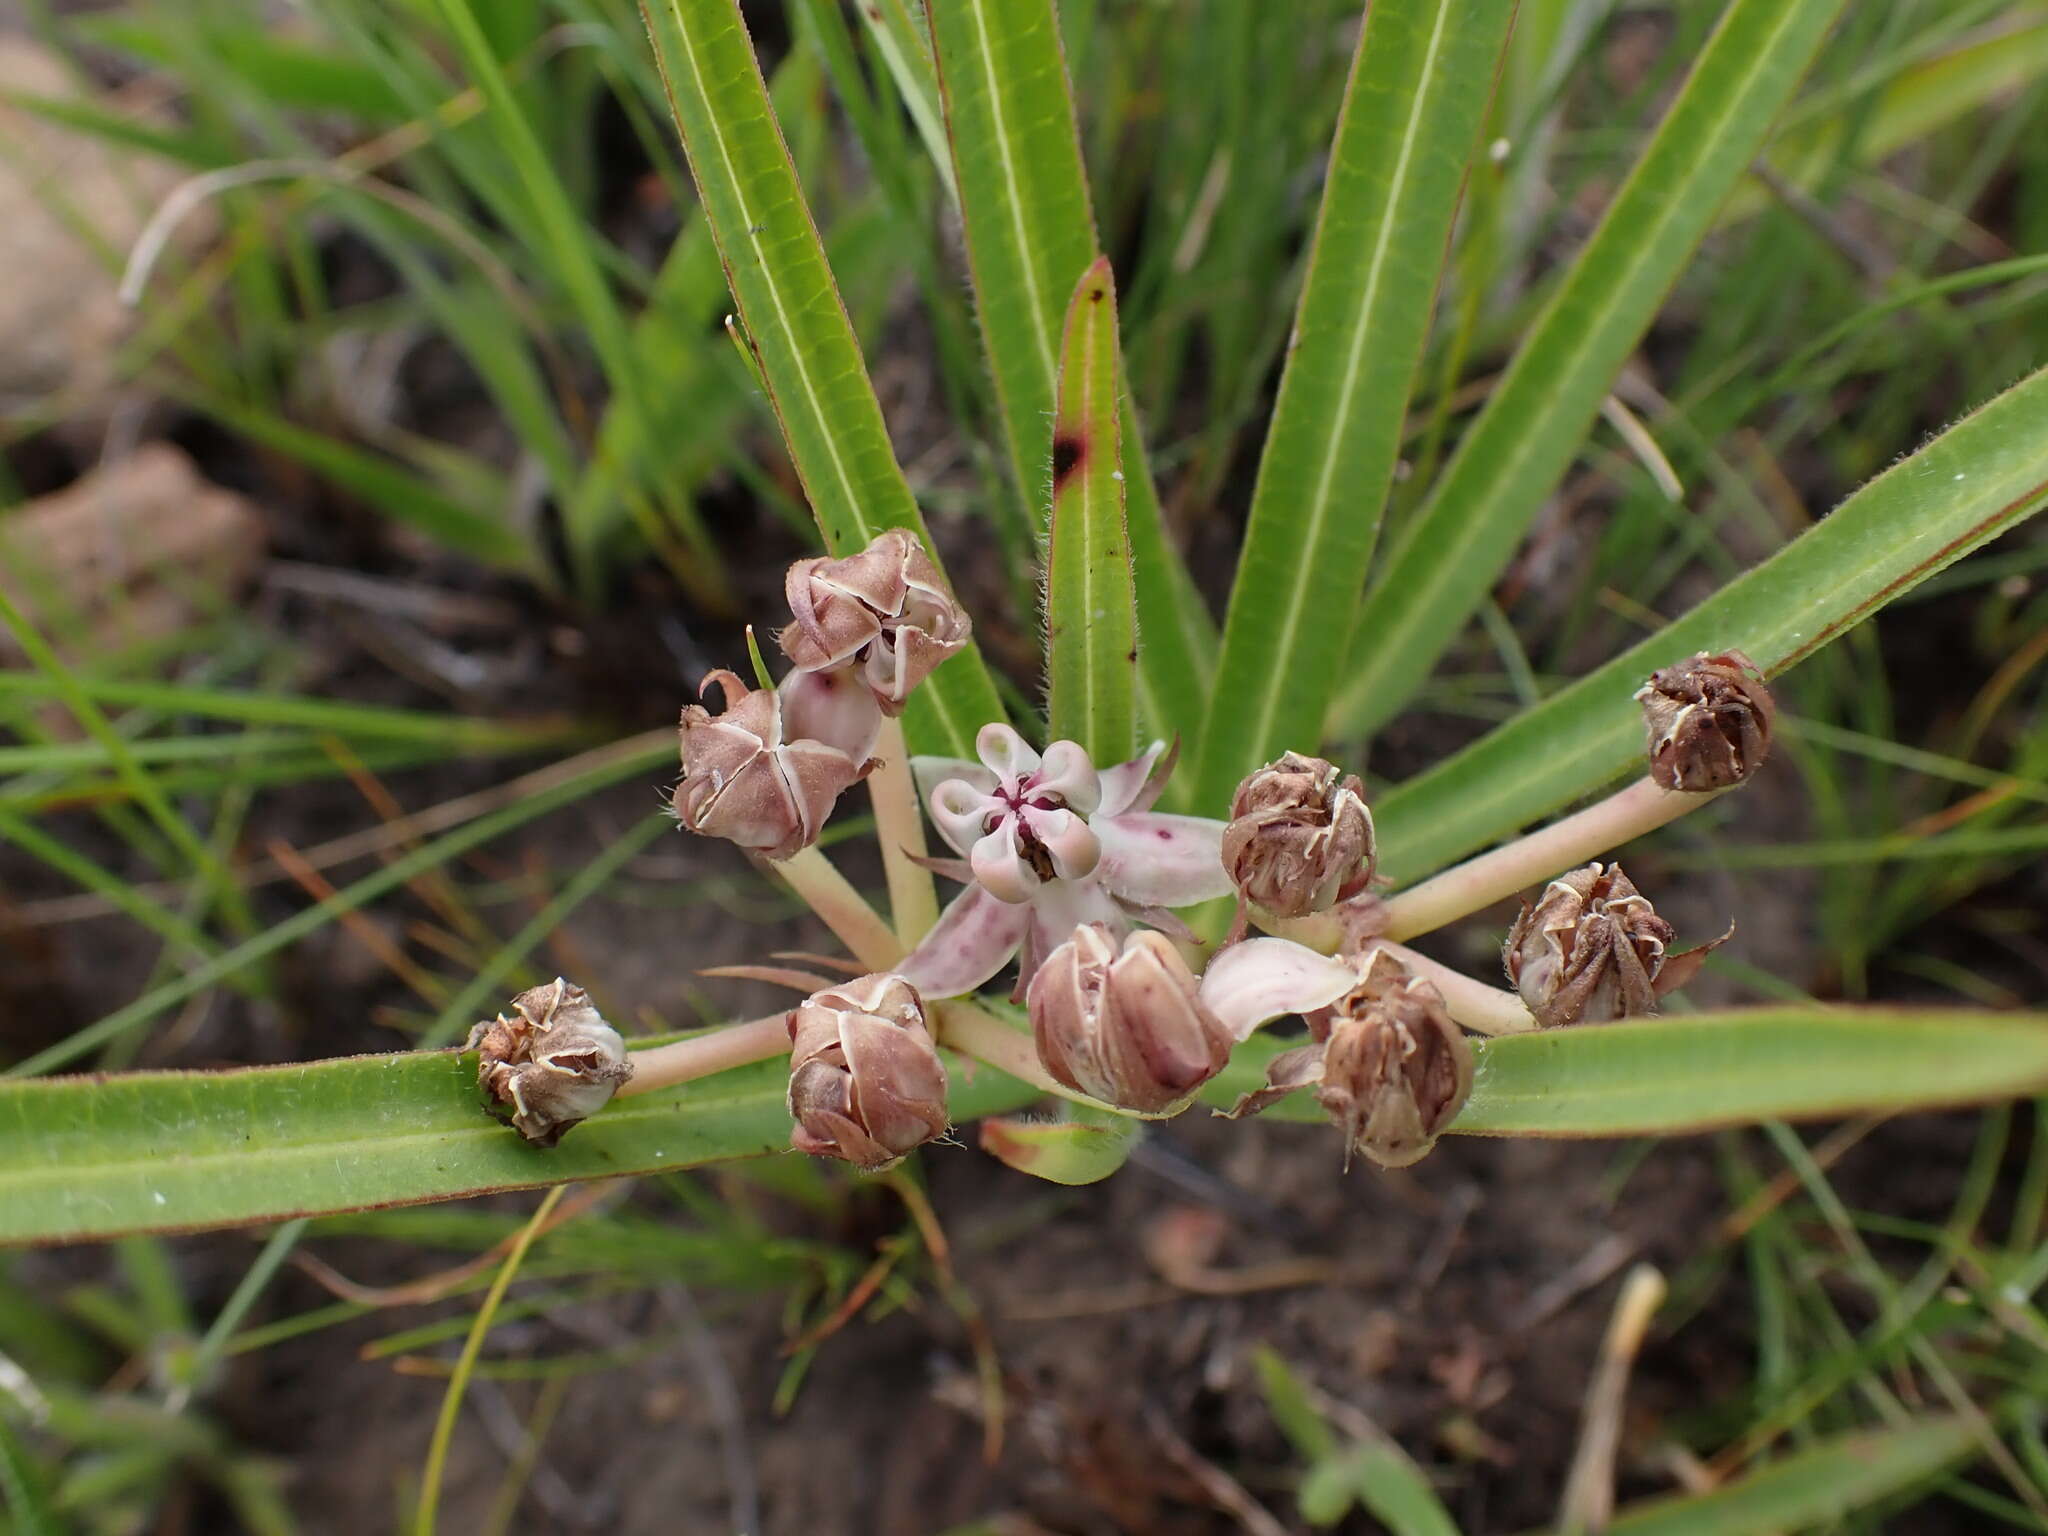 Image of Asclepias crassinervis N. E. Br.